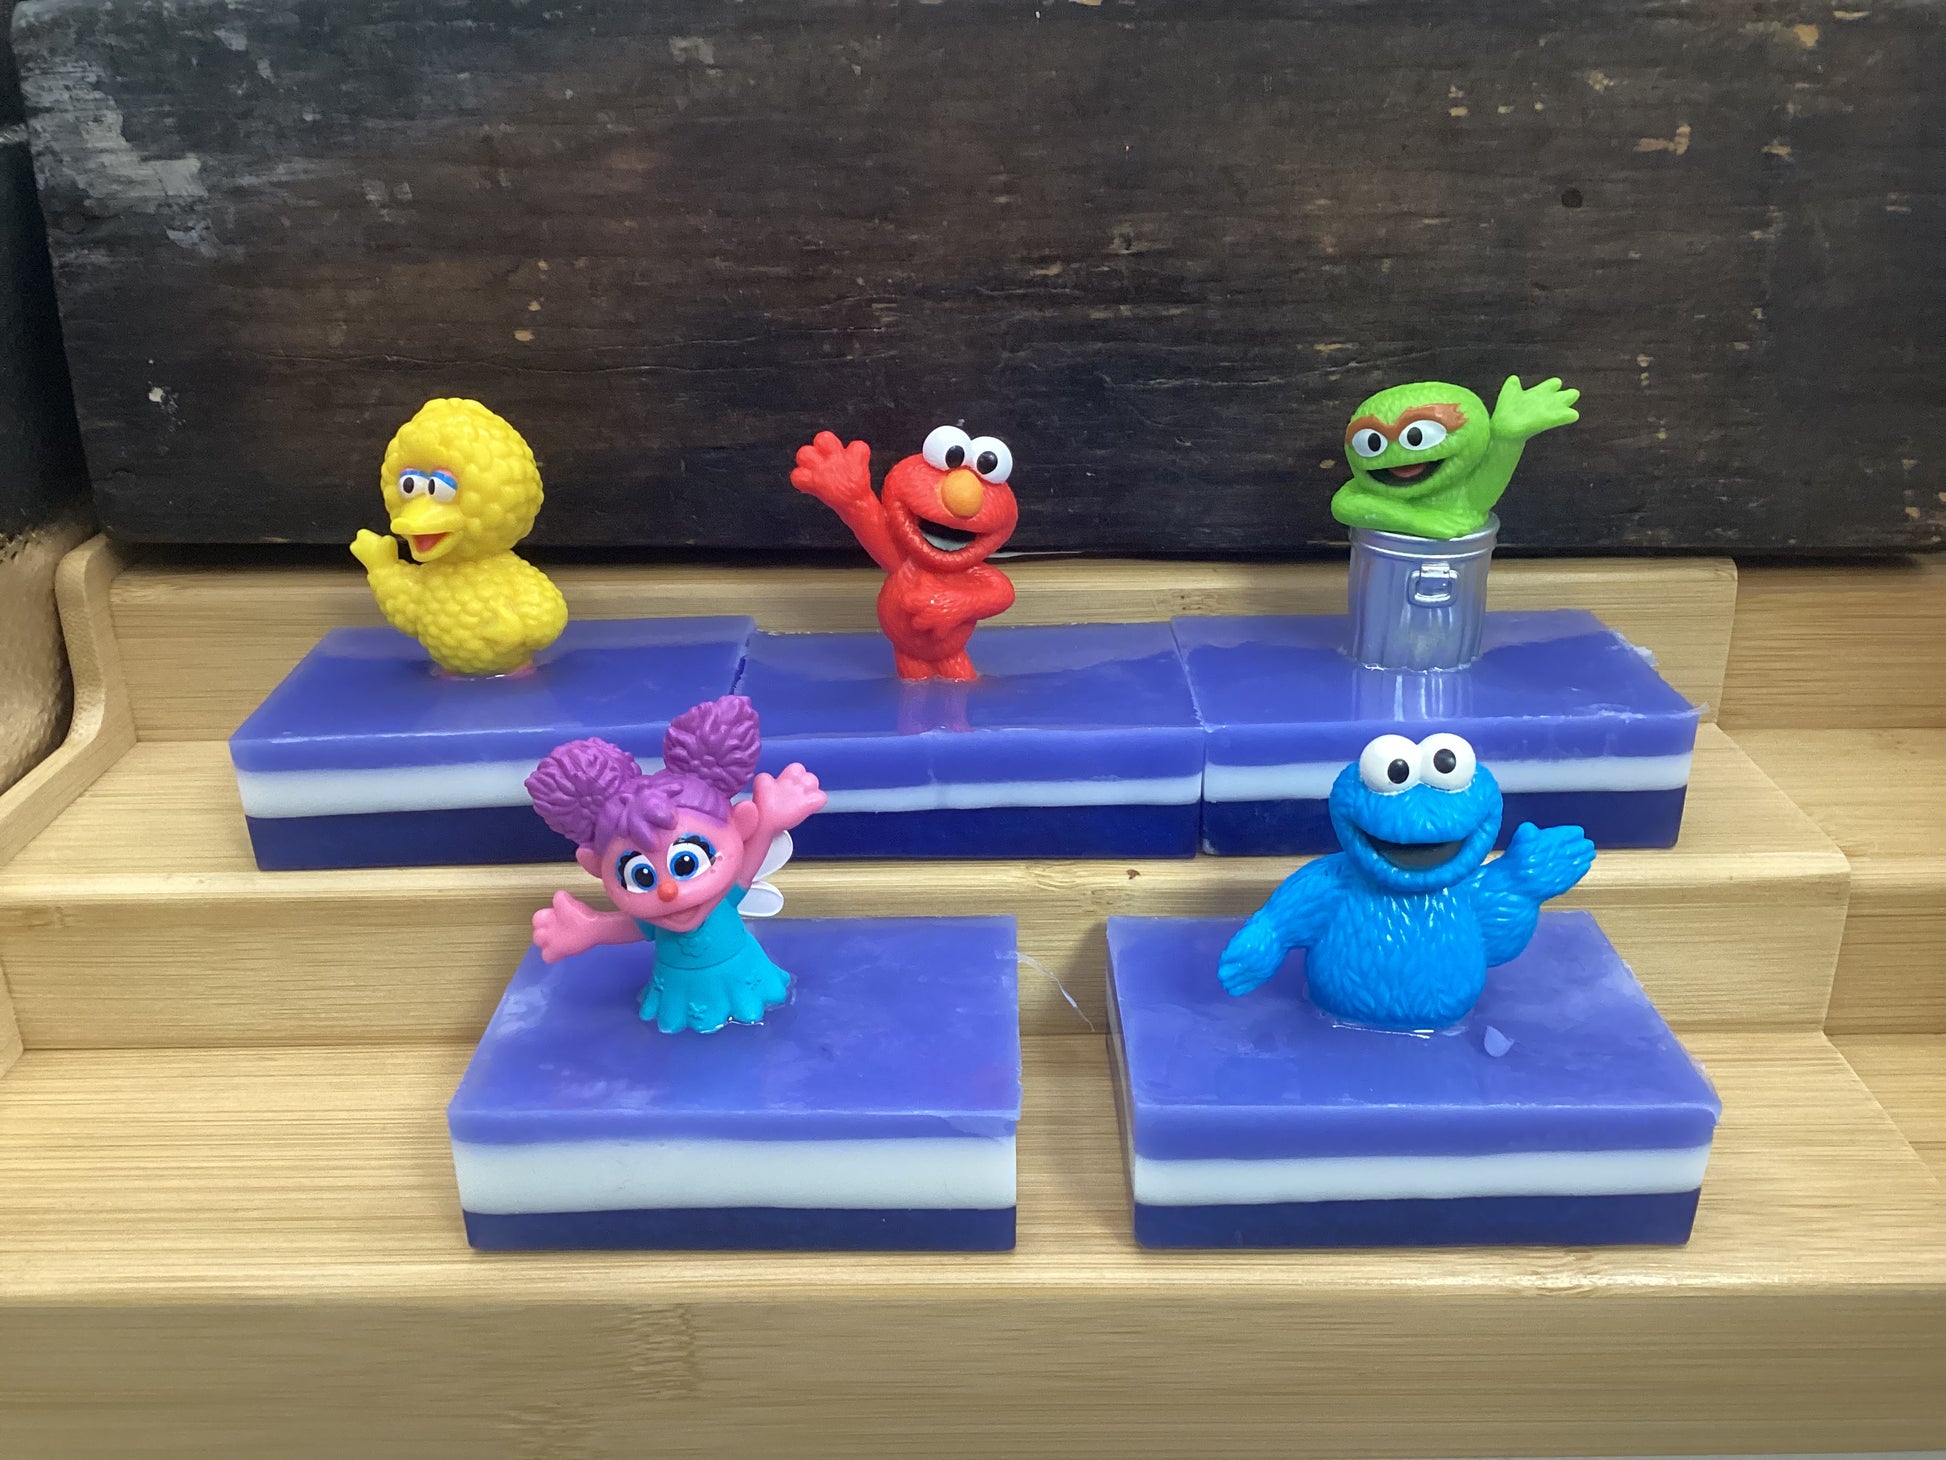 Sesame Street toy in a bar of Candy Crush Scented Glycerin Soap

I was so excited to find these.  The toys come in several different poses, so they may vary from the photo.  

Each item is handmade and may appear different than the photo. 